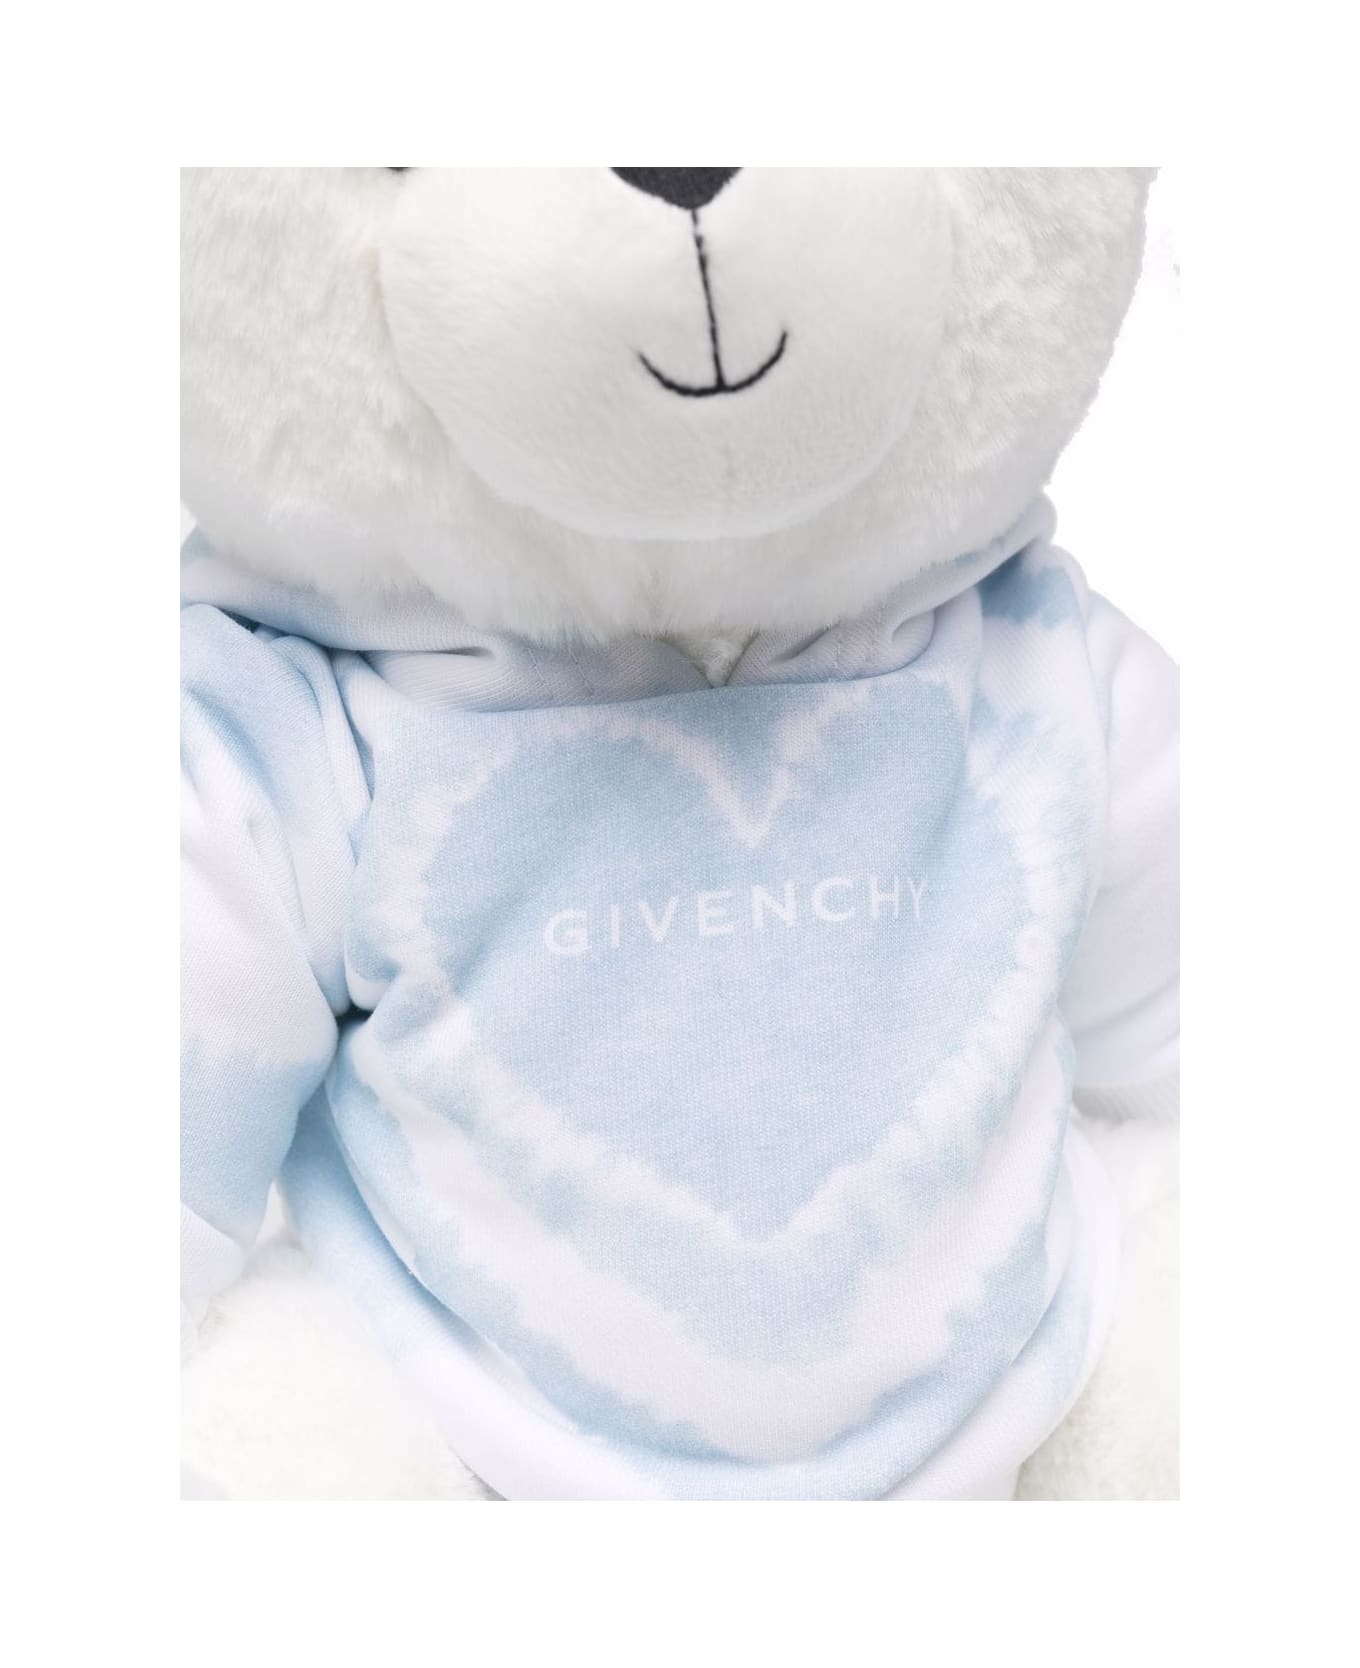 Givenchy Light Blue And White Givenchy Teddy Bear Plush - Blue アクセサリー＆ギフト